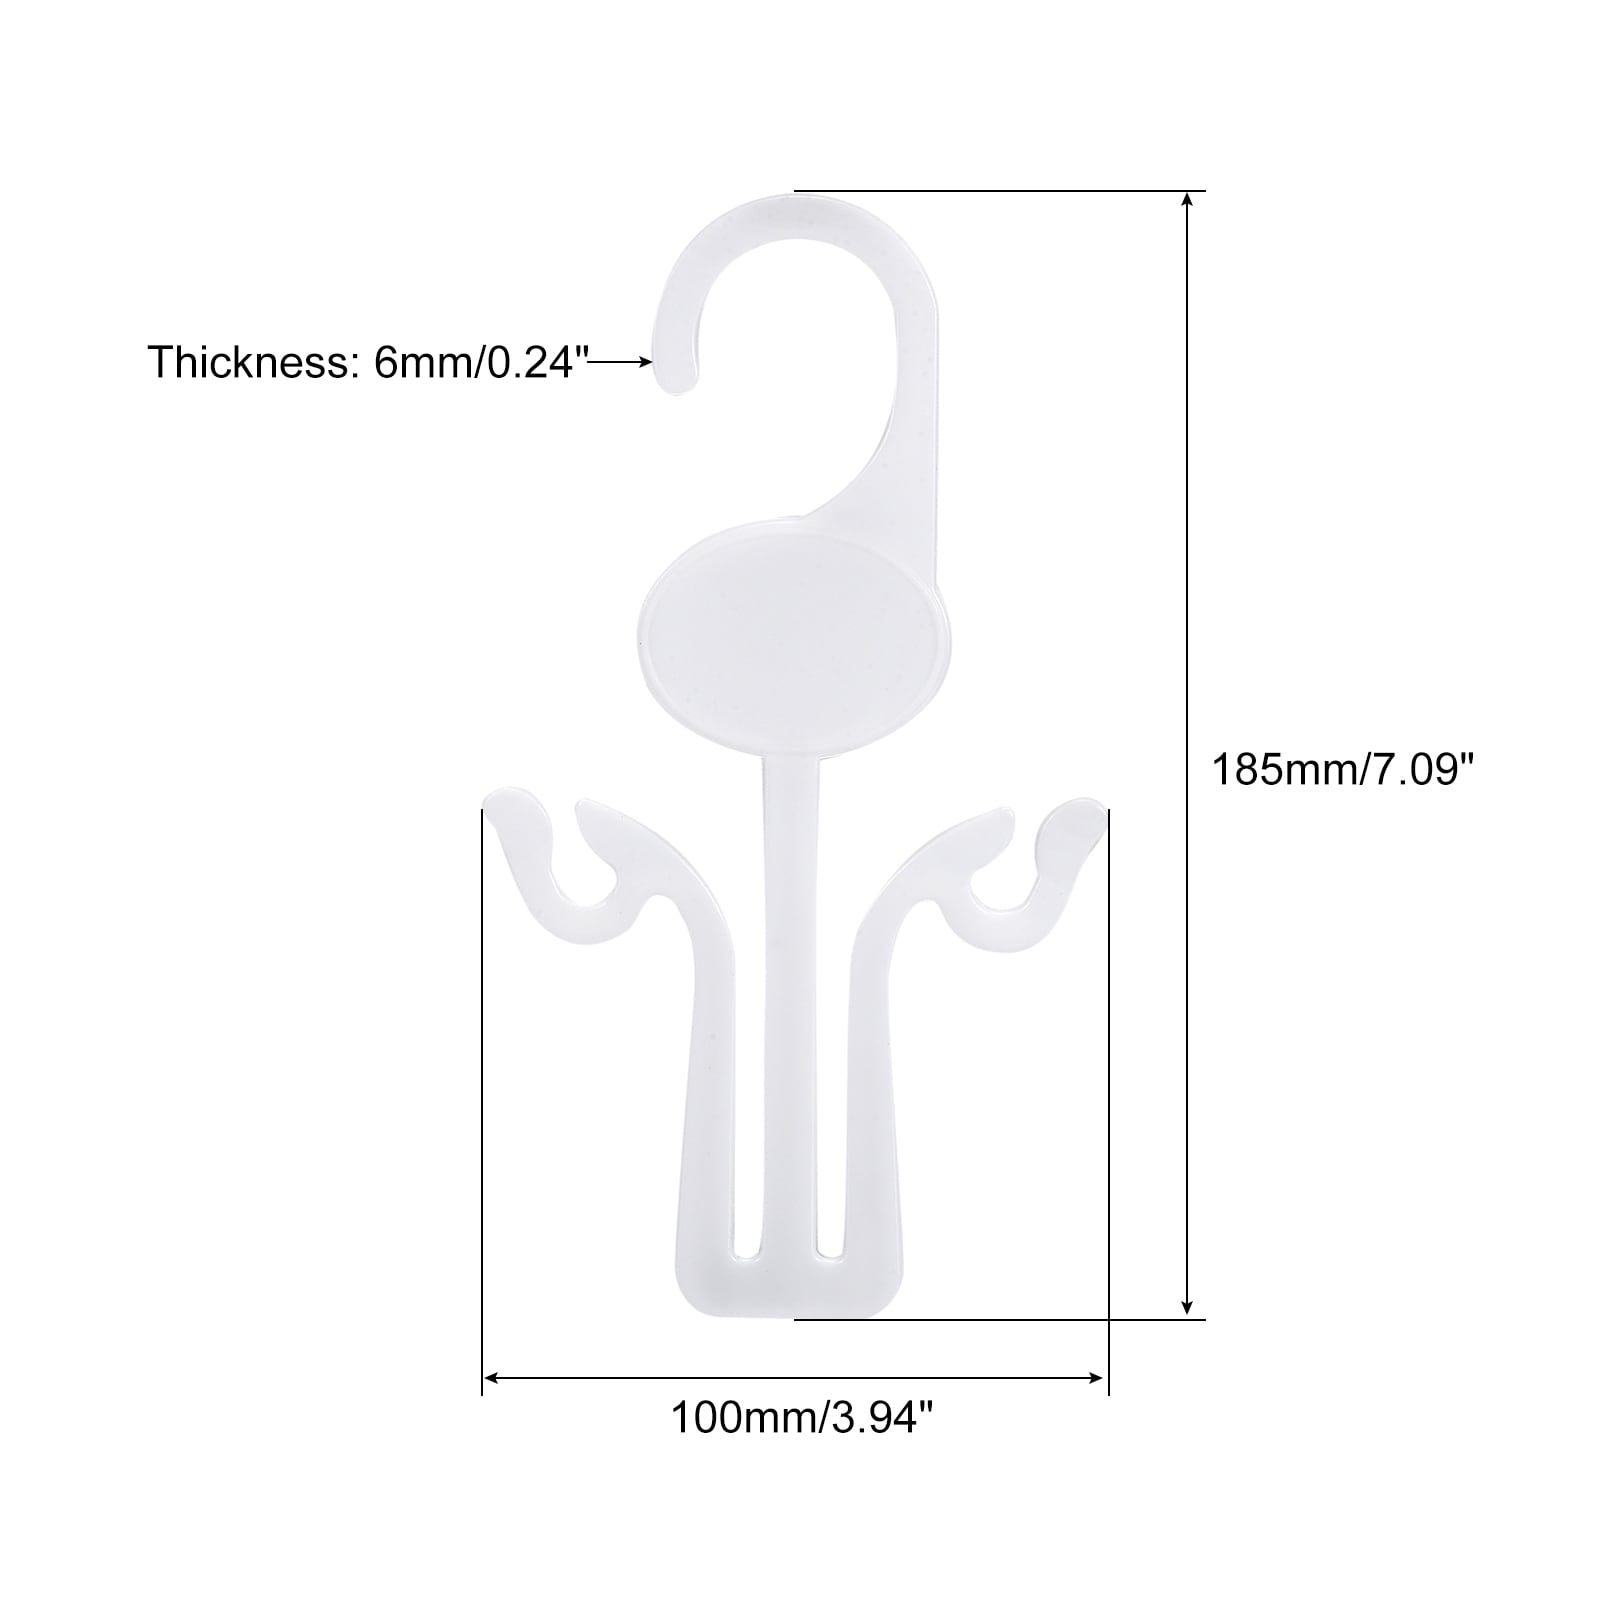 https://ak1.ostkcdn.com/images/products/is/images/direct/7b9e30378e0f08e917c00a49b60e2f3c850fe24b/Shoe-Hanging-Hooks%2C-185mm-x-100mm-PP-Shoes-Holder-Storage-Organizer-White-4-Pcs.jpg